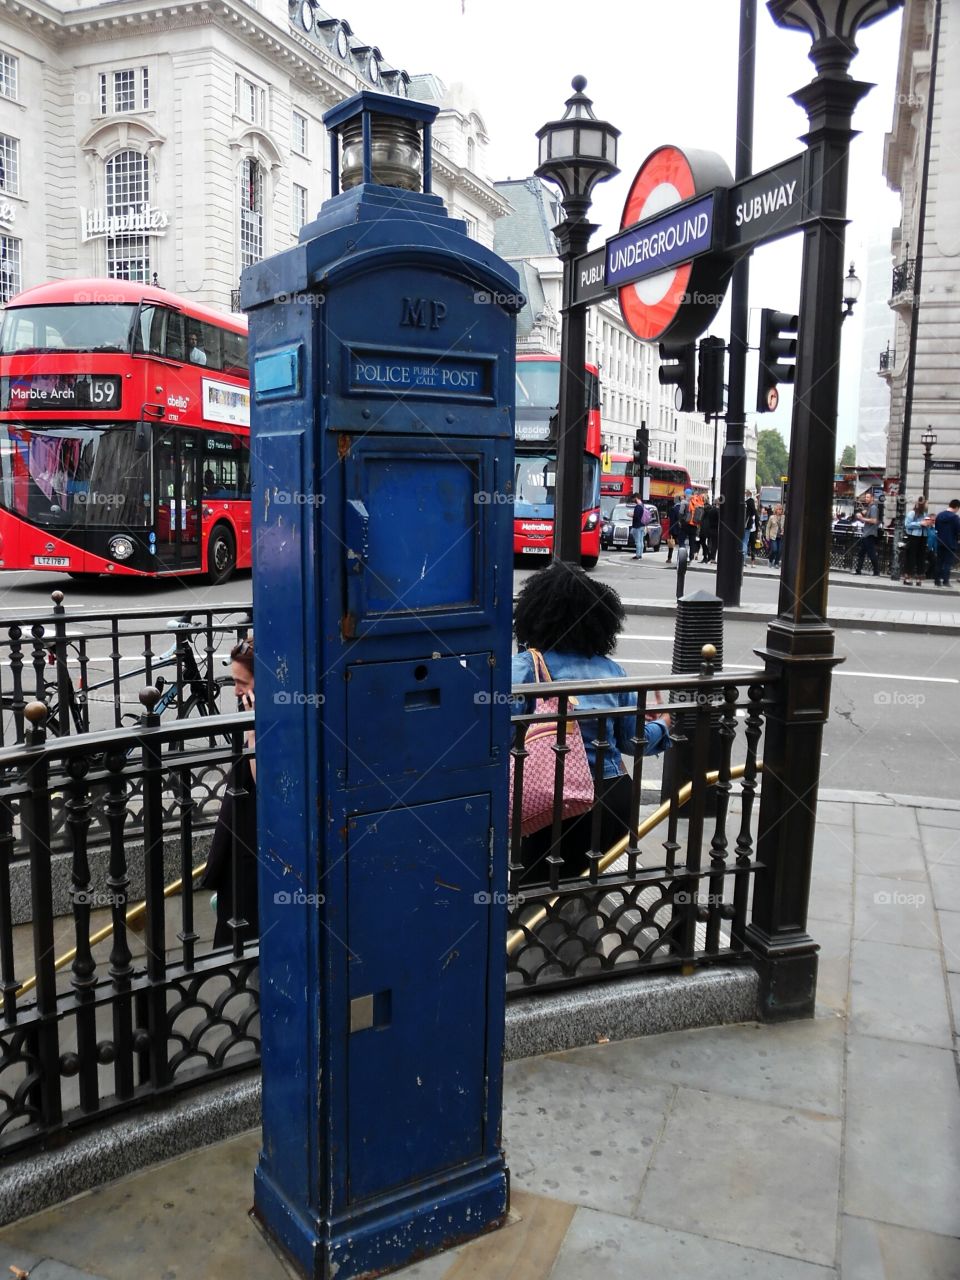 police call box on the corner outside picadilly subway station.